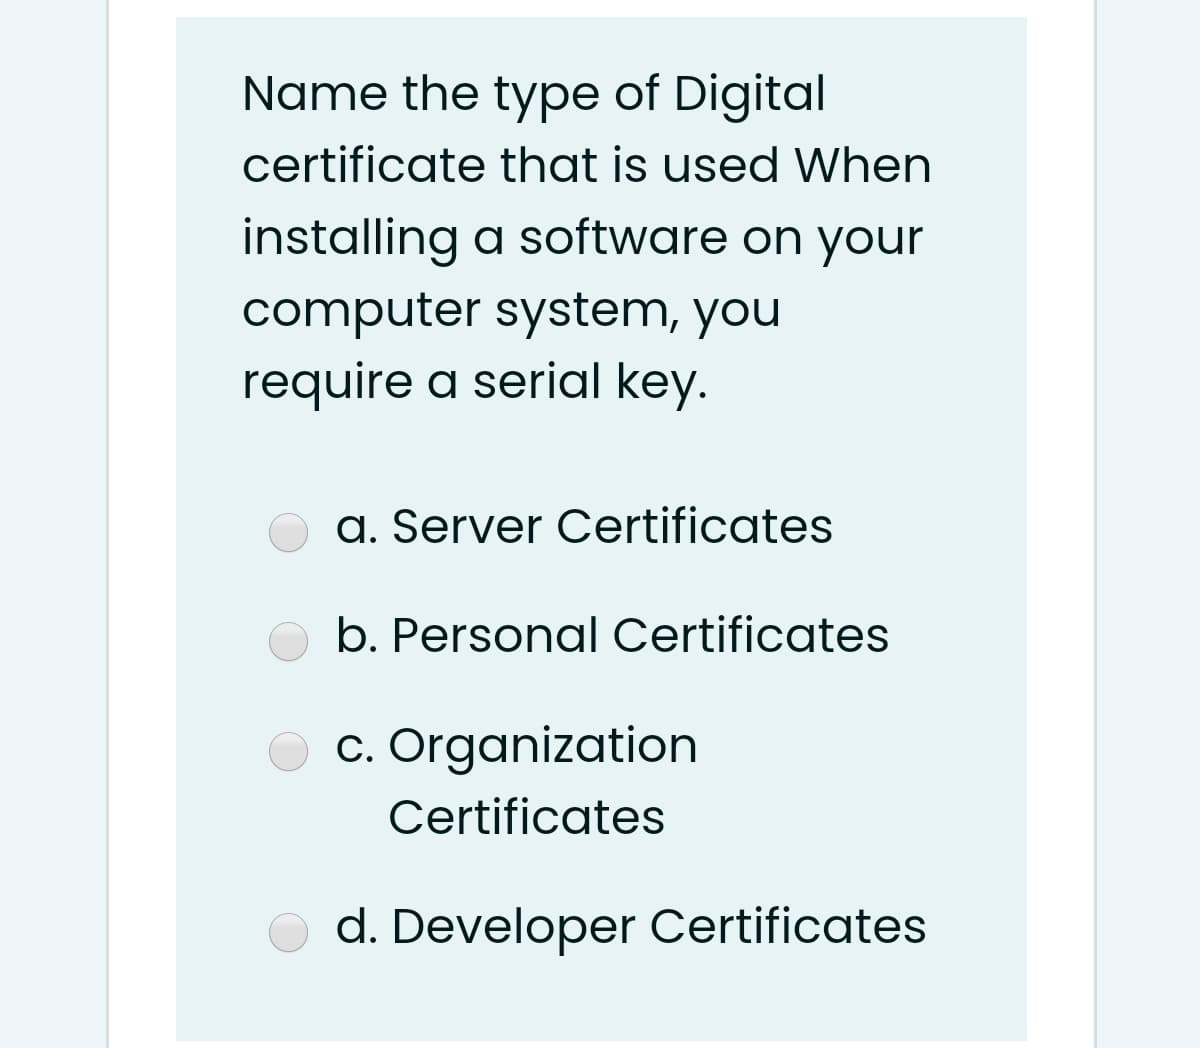 Name the type of Digital
certificate that is used When
installing a software on your
computer system, you
require a serial key.
a. Server Certificates
b. Personal Certificates
c. Organization
Certificates
d. Developer Certificates
